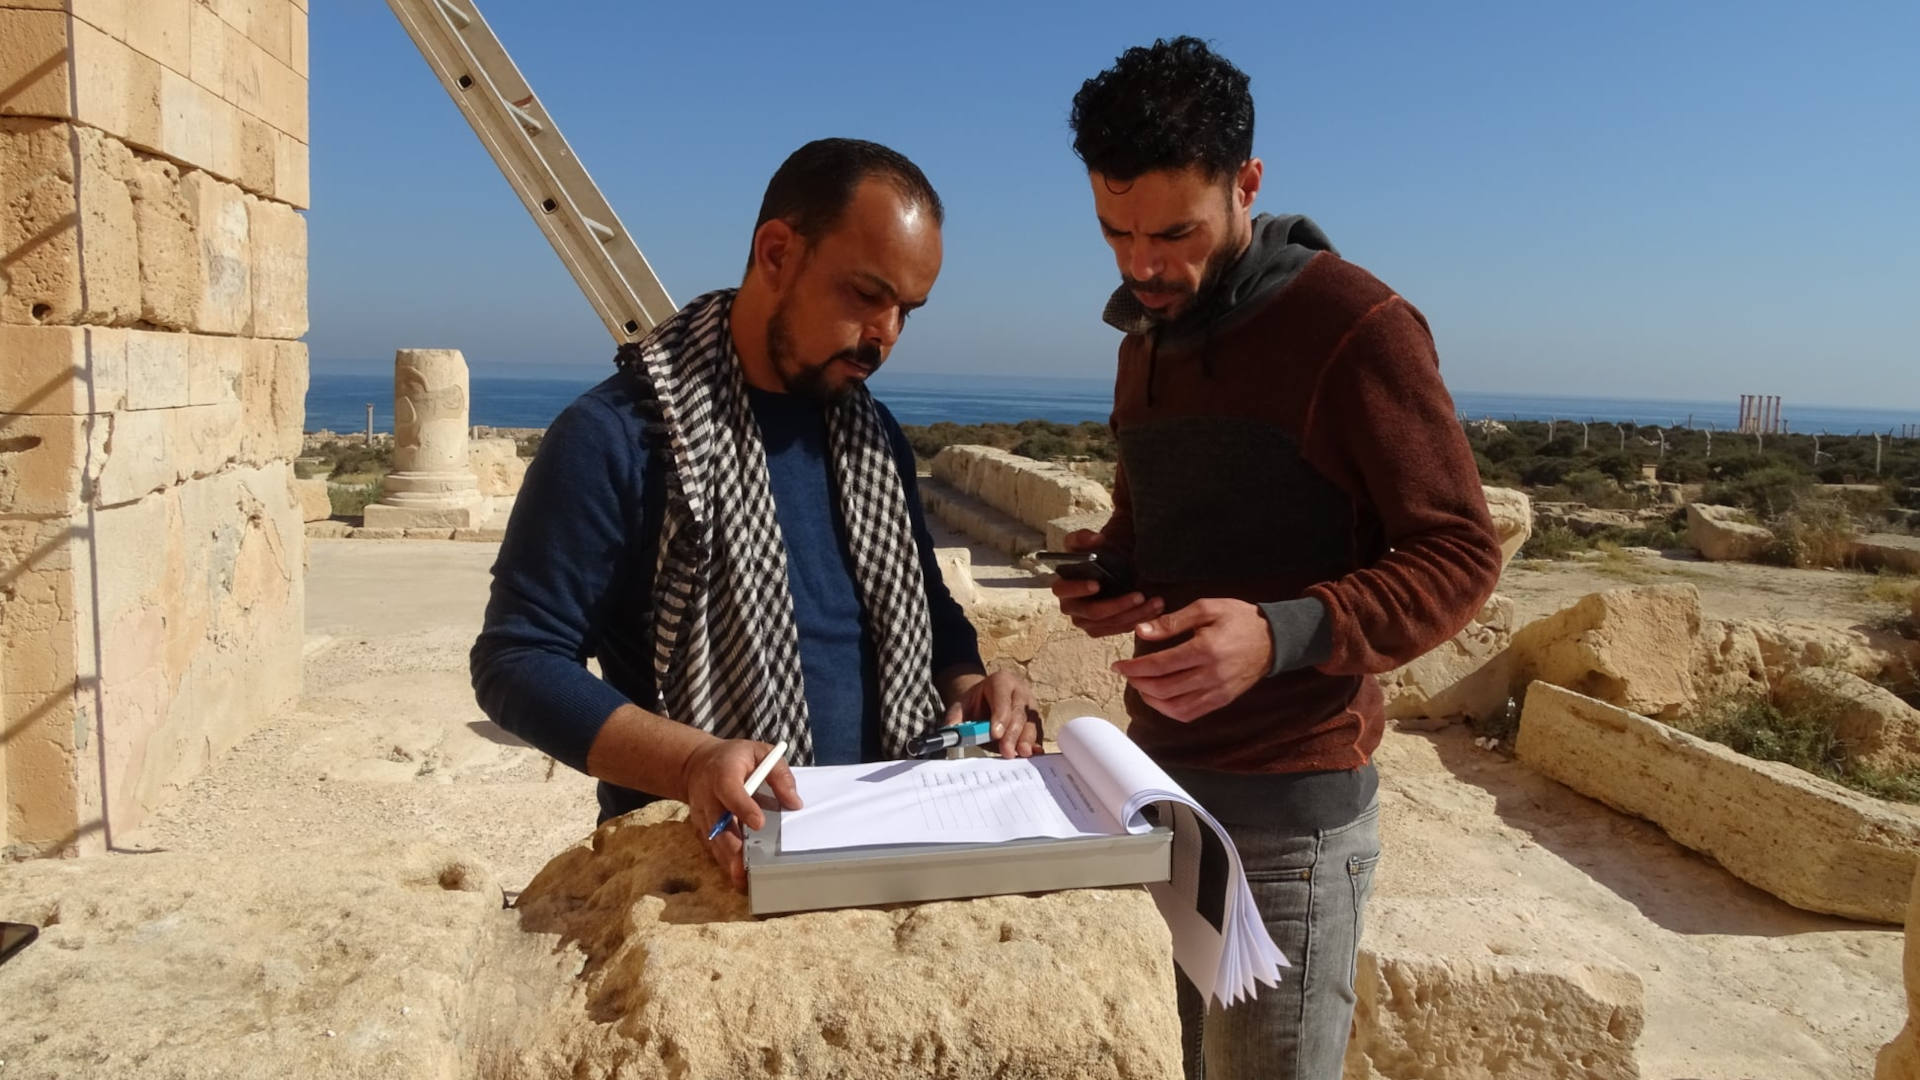 Mahmoud Hadia (left) and Ahmed Masoud (right) record bullet hole measurements at Sabratha, an ancient Roman theater that was damaged during fighting in 2017.